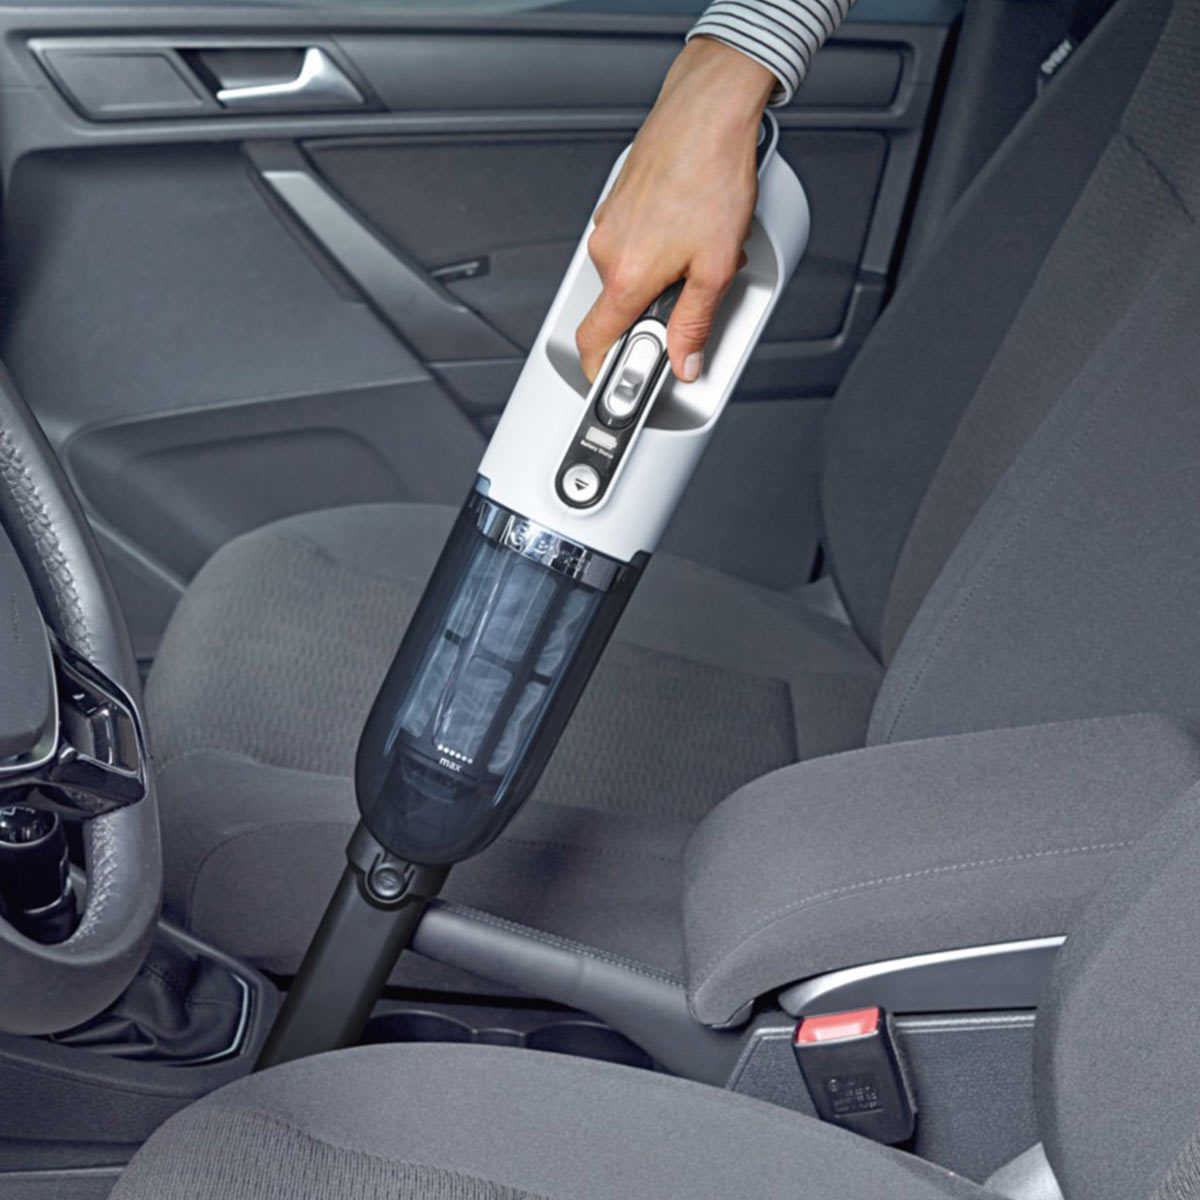 Image of handheld vaccum being used to clean the inside of a car